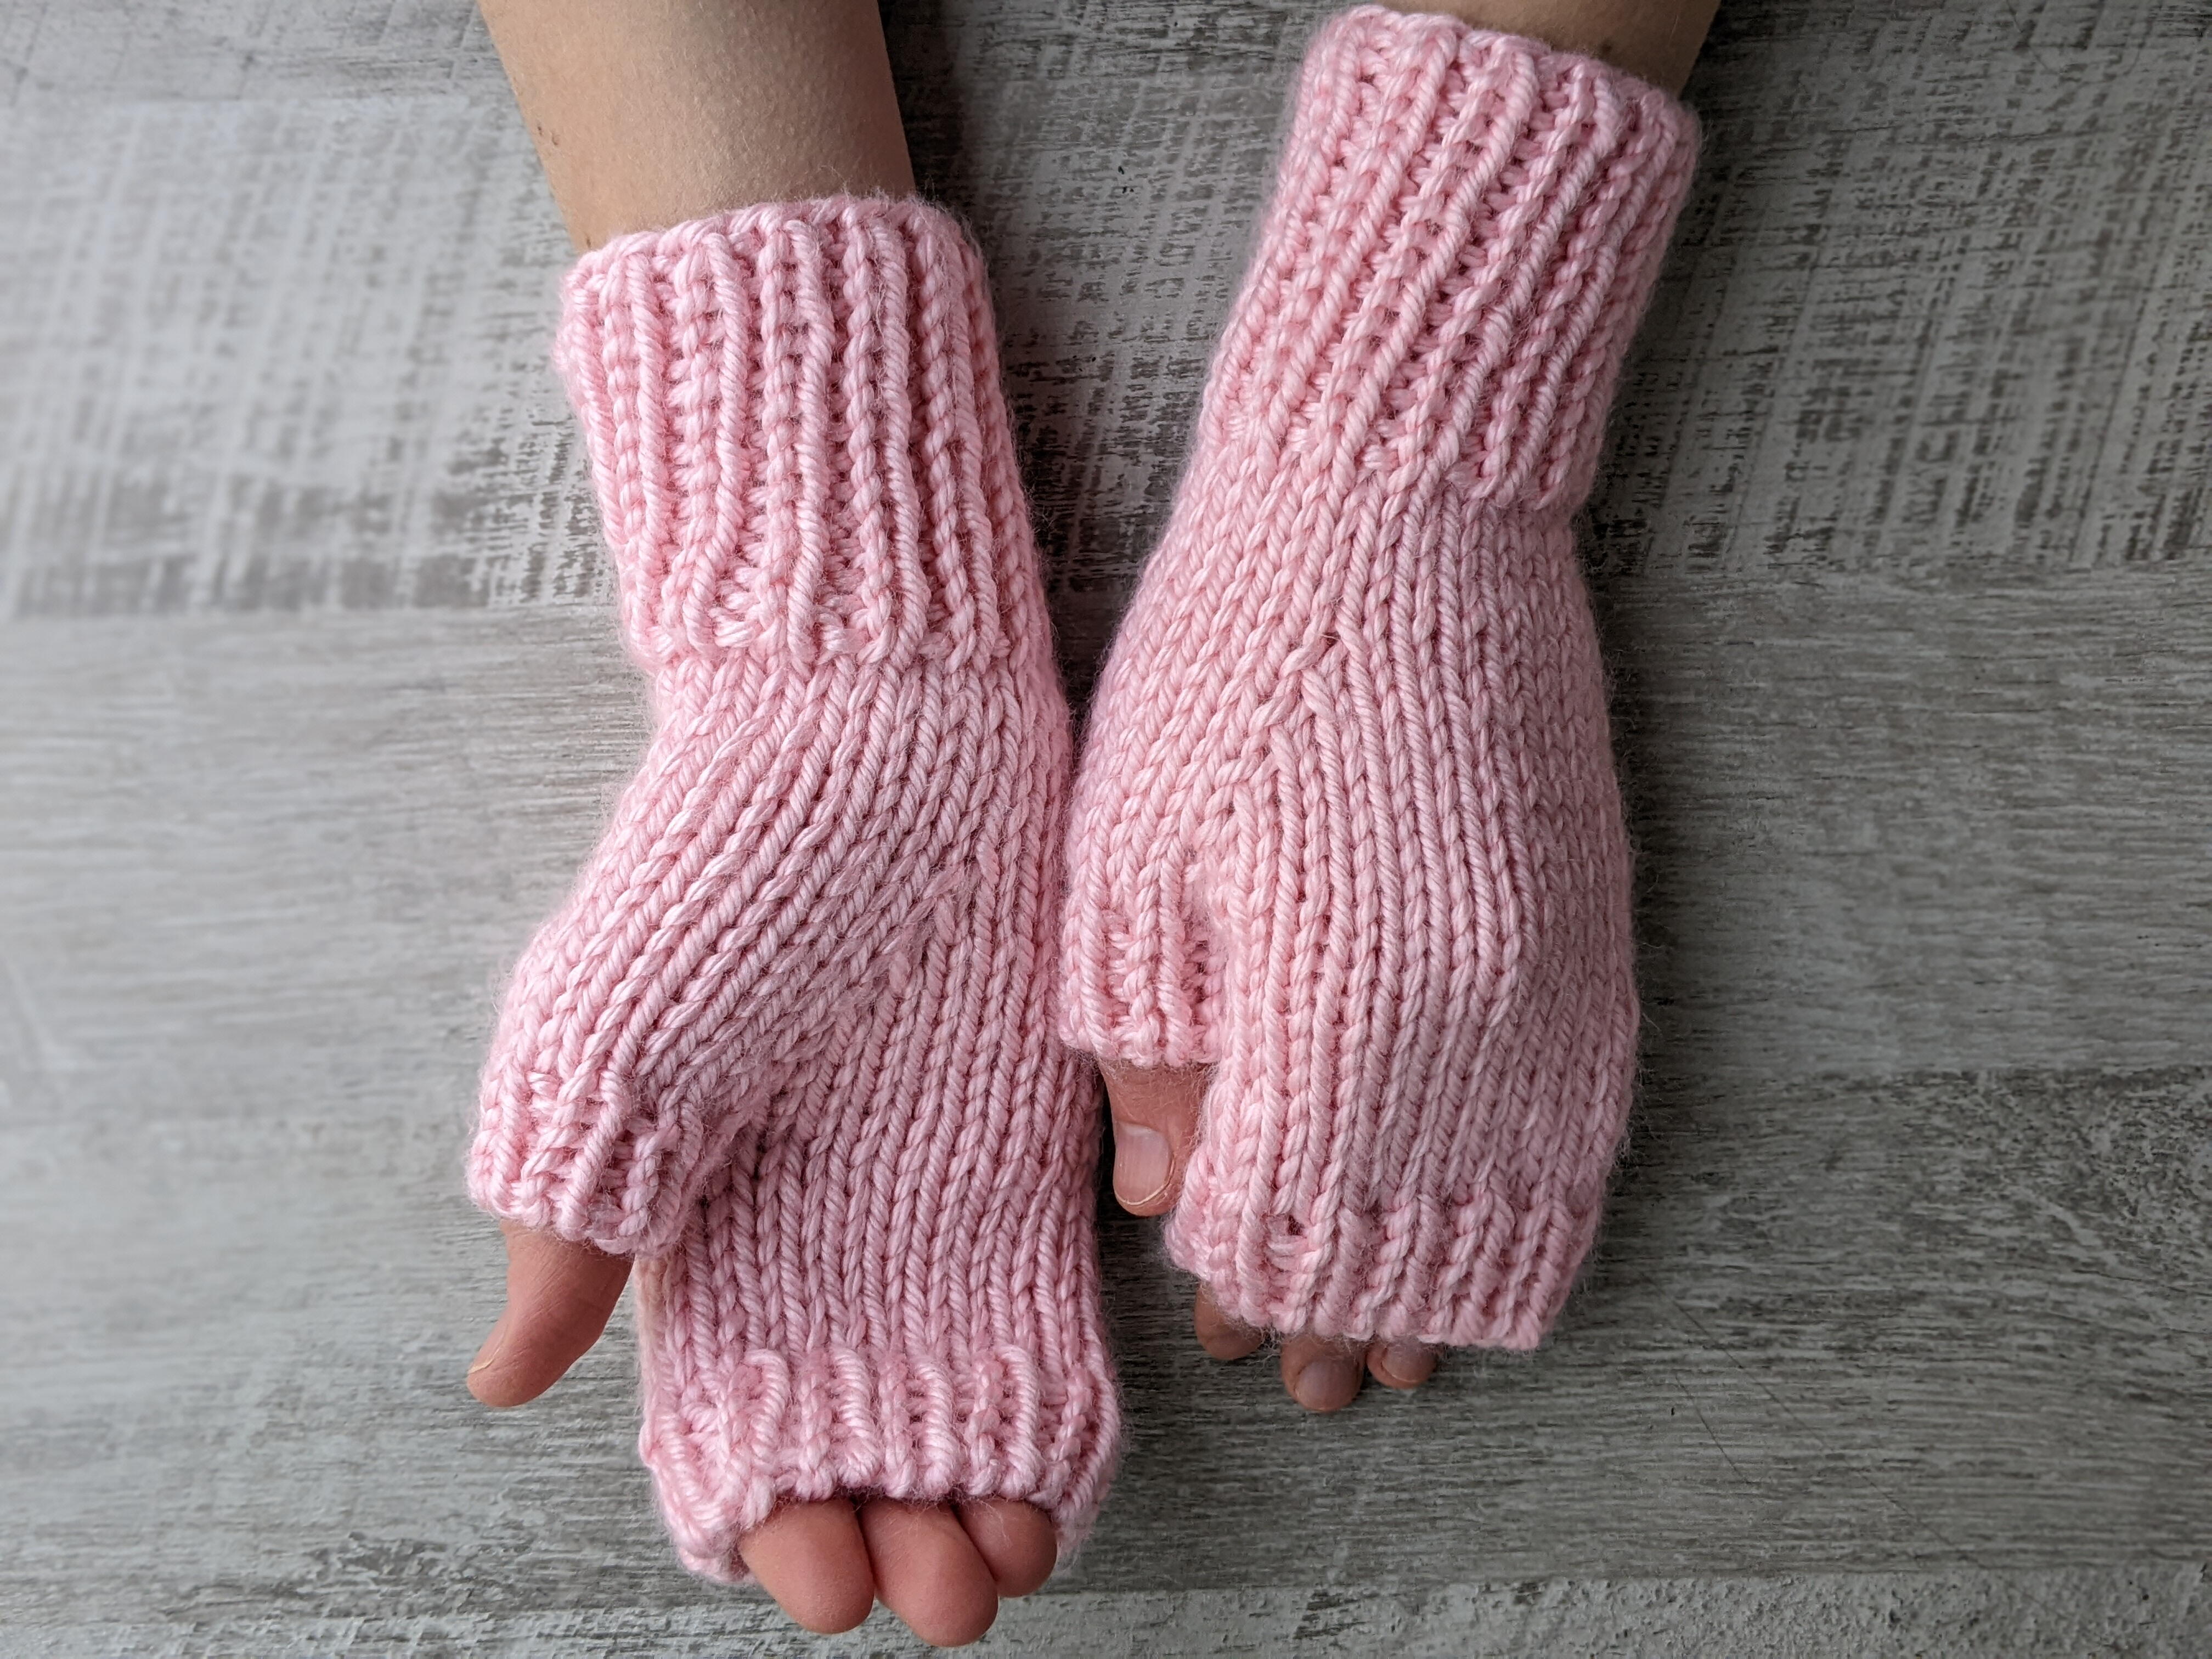 Knitting Patterns Galore - Fingerless Arm Warmers or Mitts – with Bows